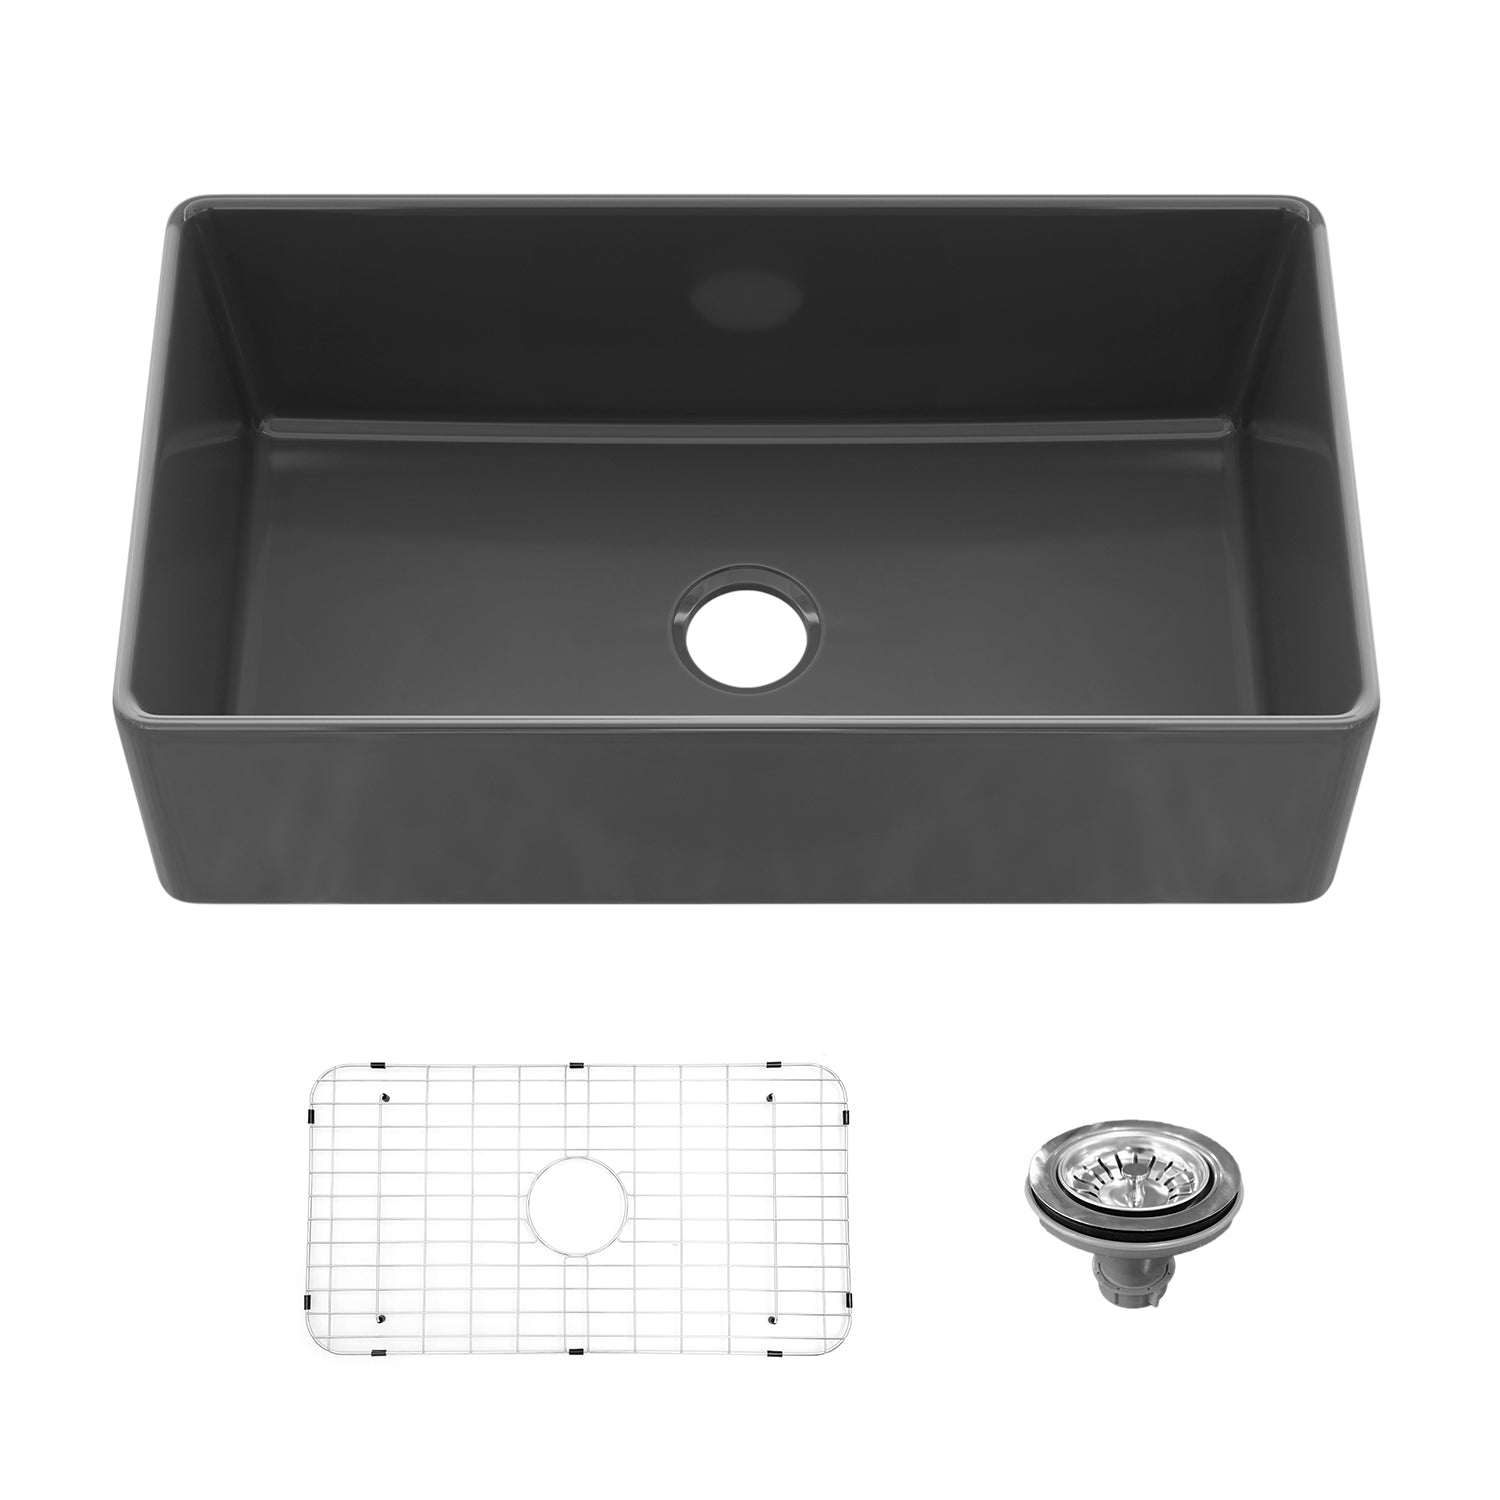 Sinber 33 Inch Farmhouse Apron Single Bowl Kitchen Sink with Fireclay Black Finish 2 Accessories F3318S-B-OL